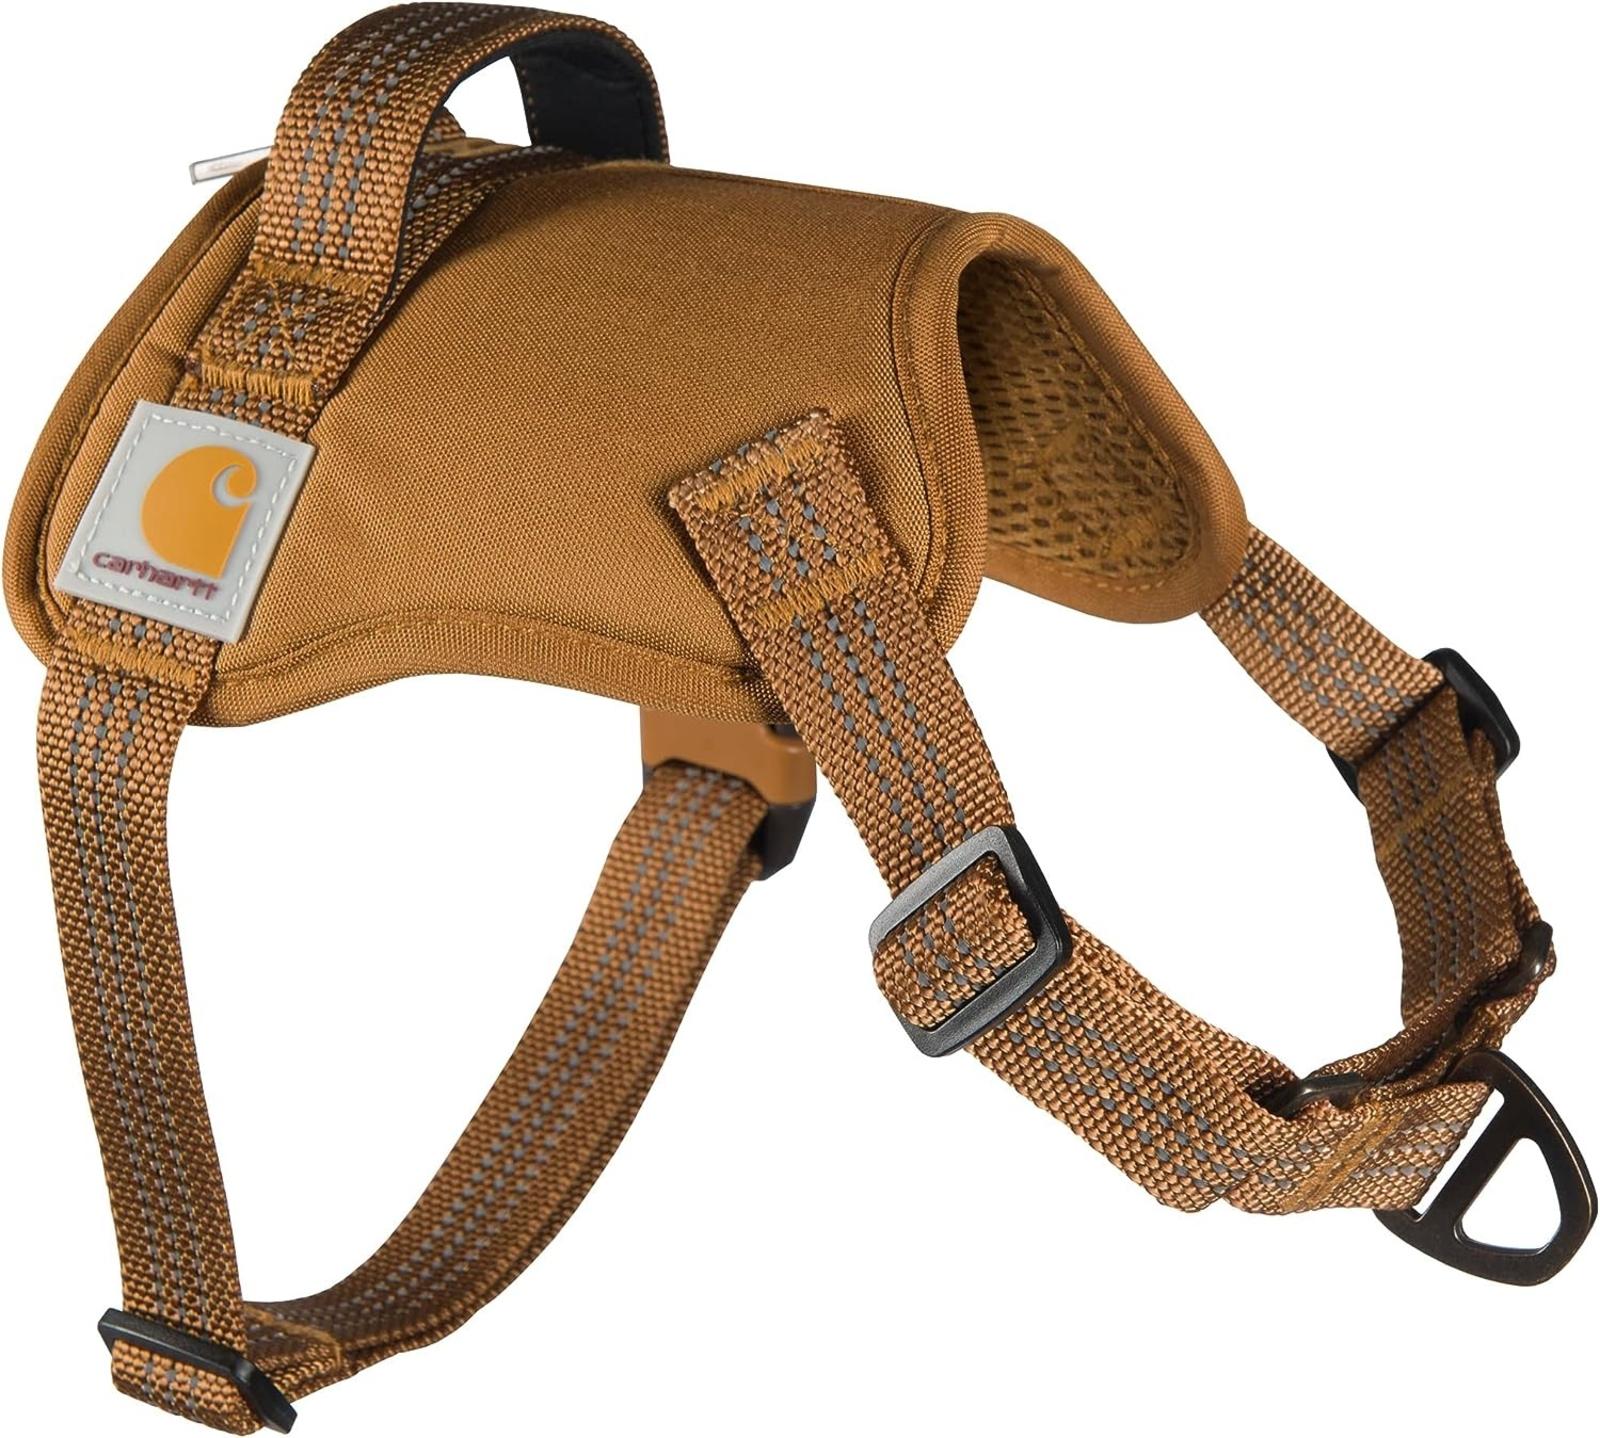 Carhartt Nylon Duck No Pull Dog Harness Front view